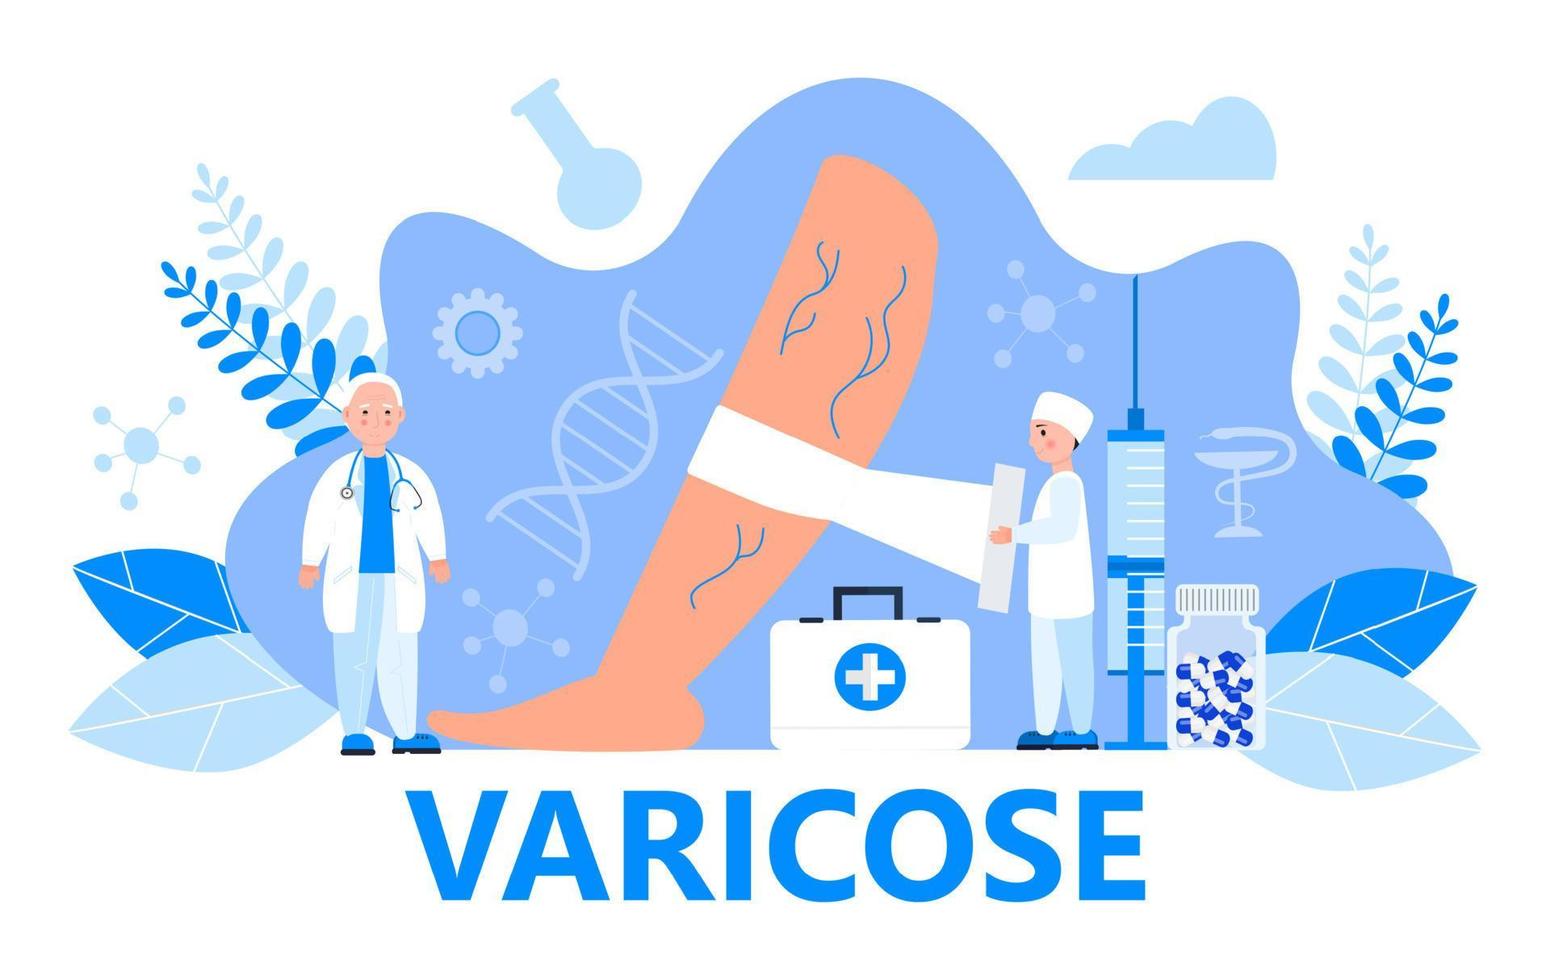 Varicose veins concept vector for medical website. Tiny surgeons, therapists treat vascular diseases, apply tight bandage.